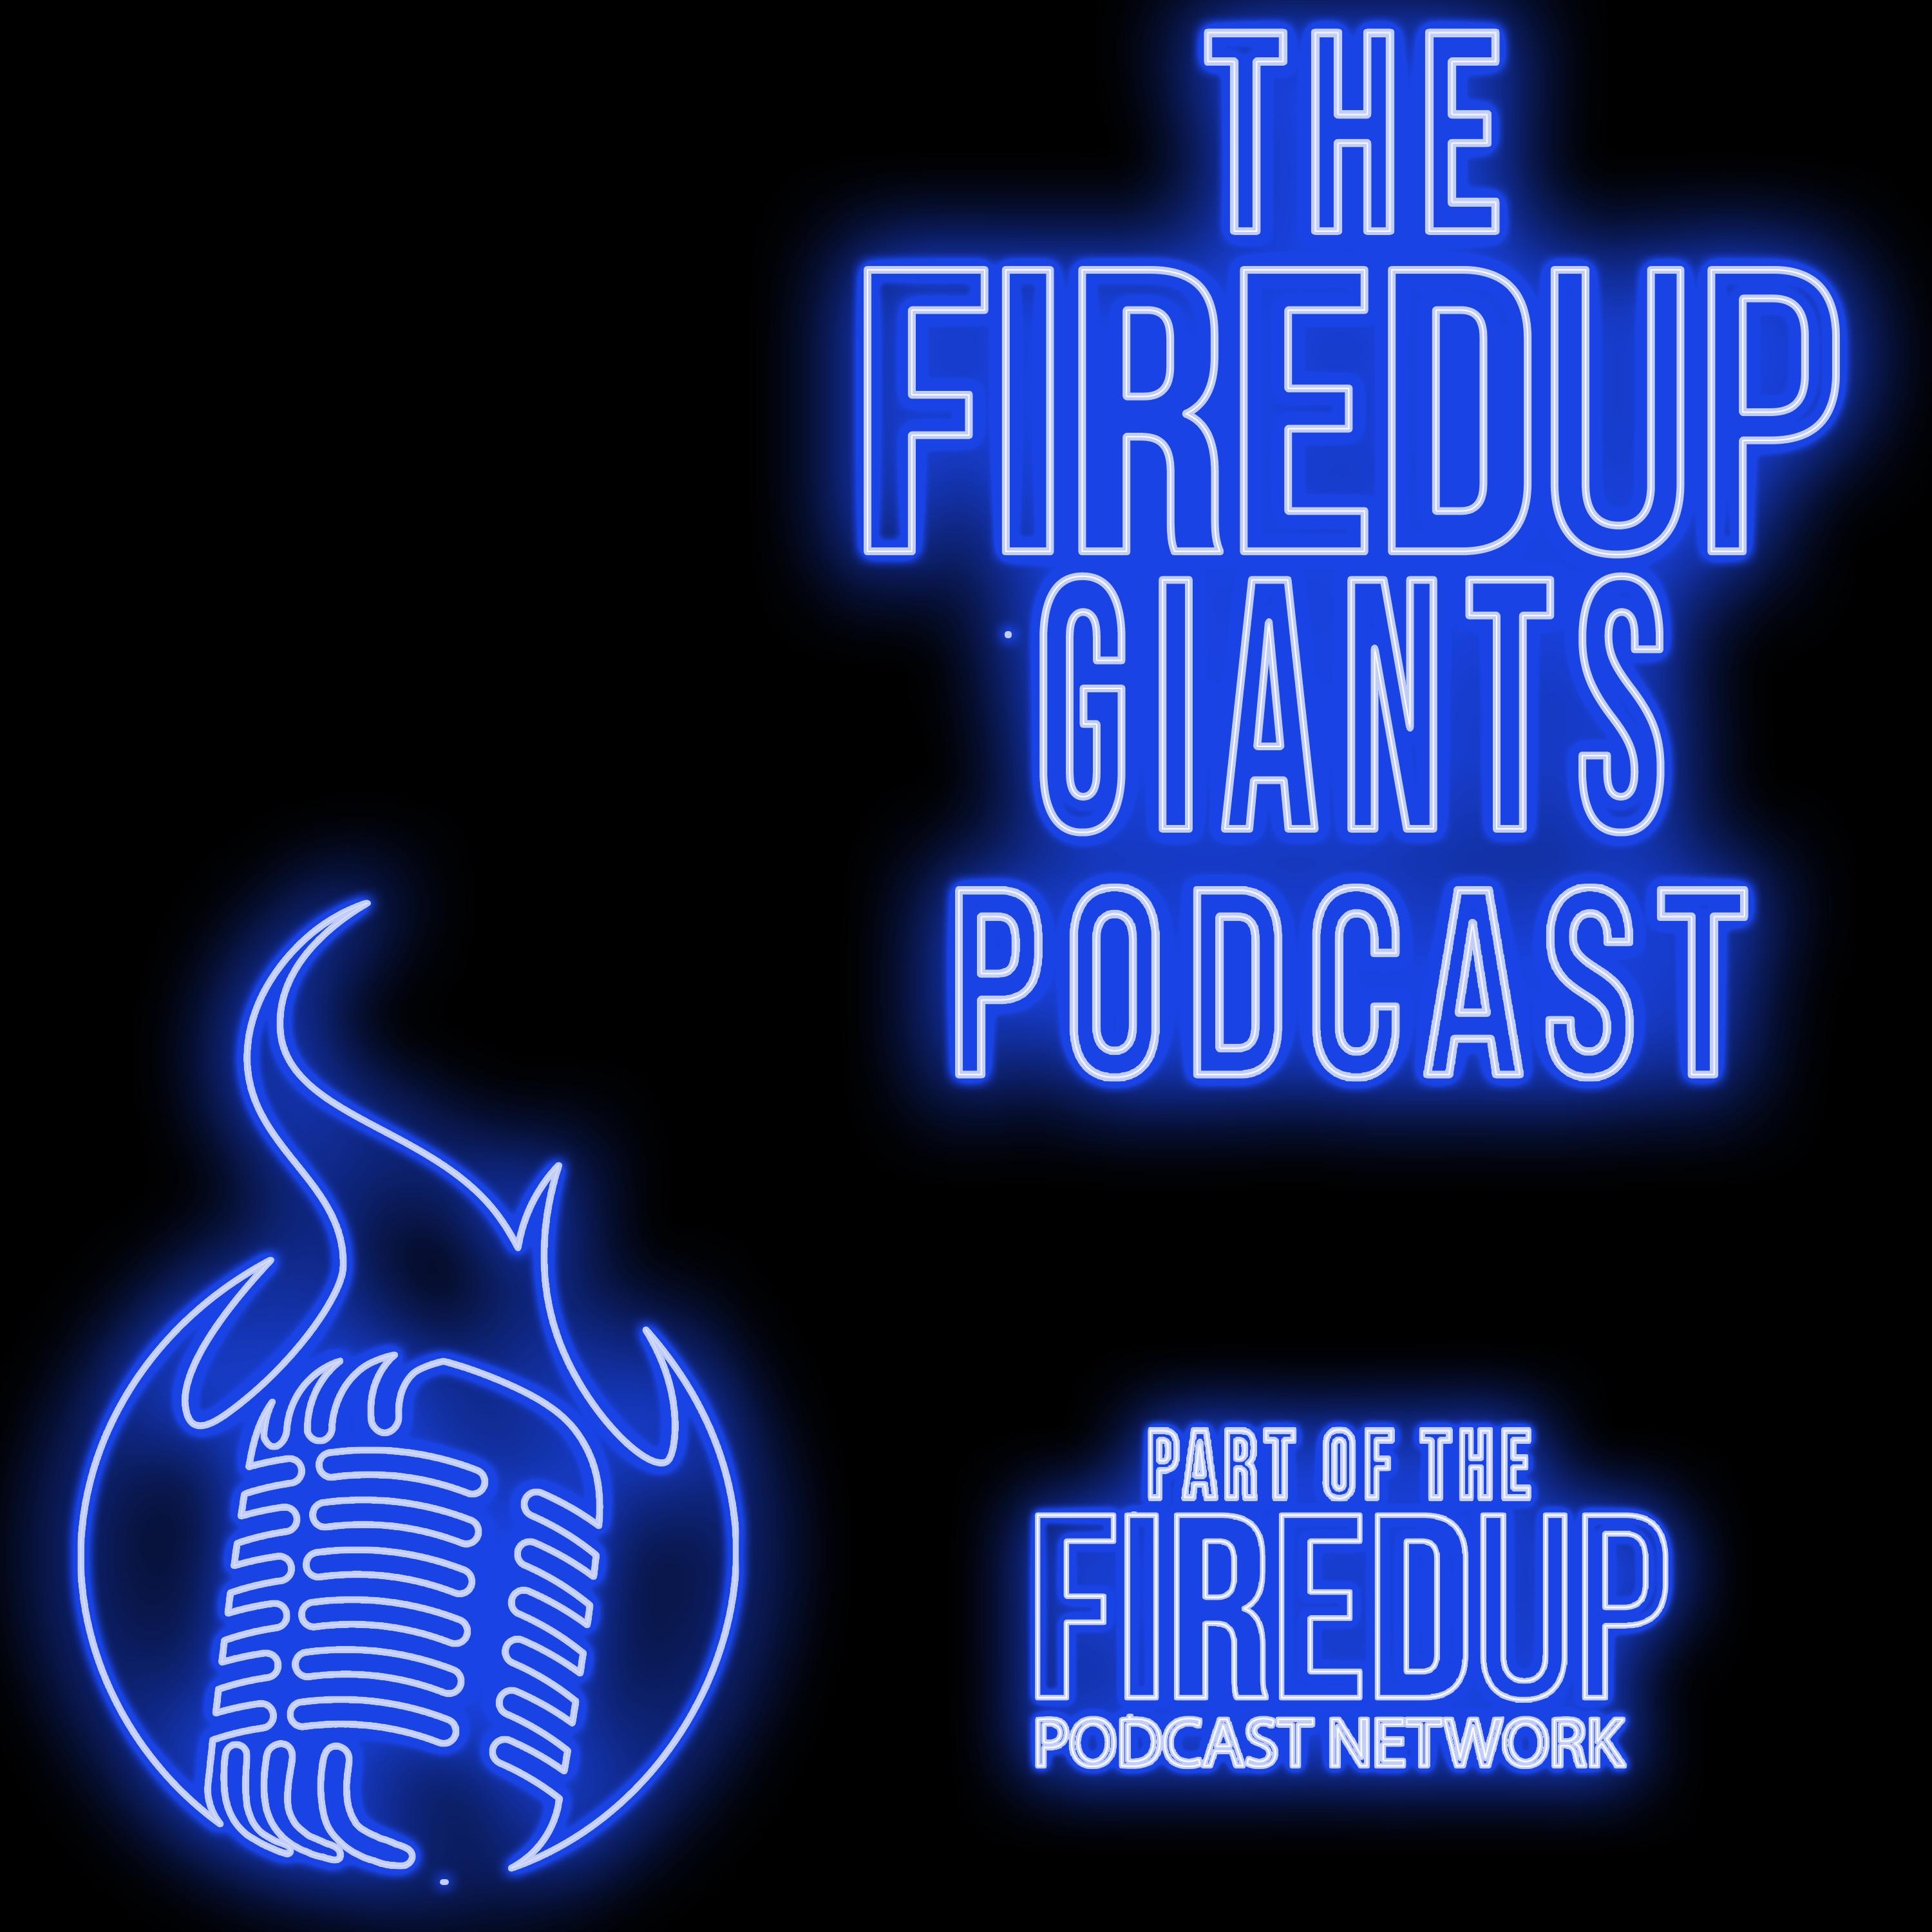 The Fired Up Giants Podcast